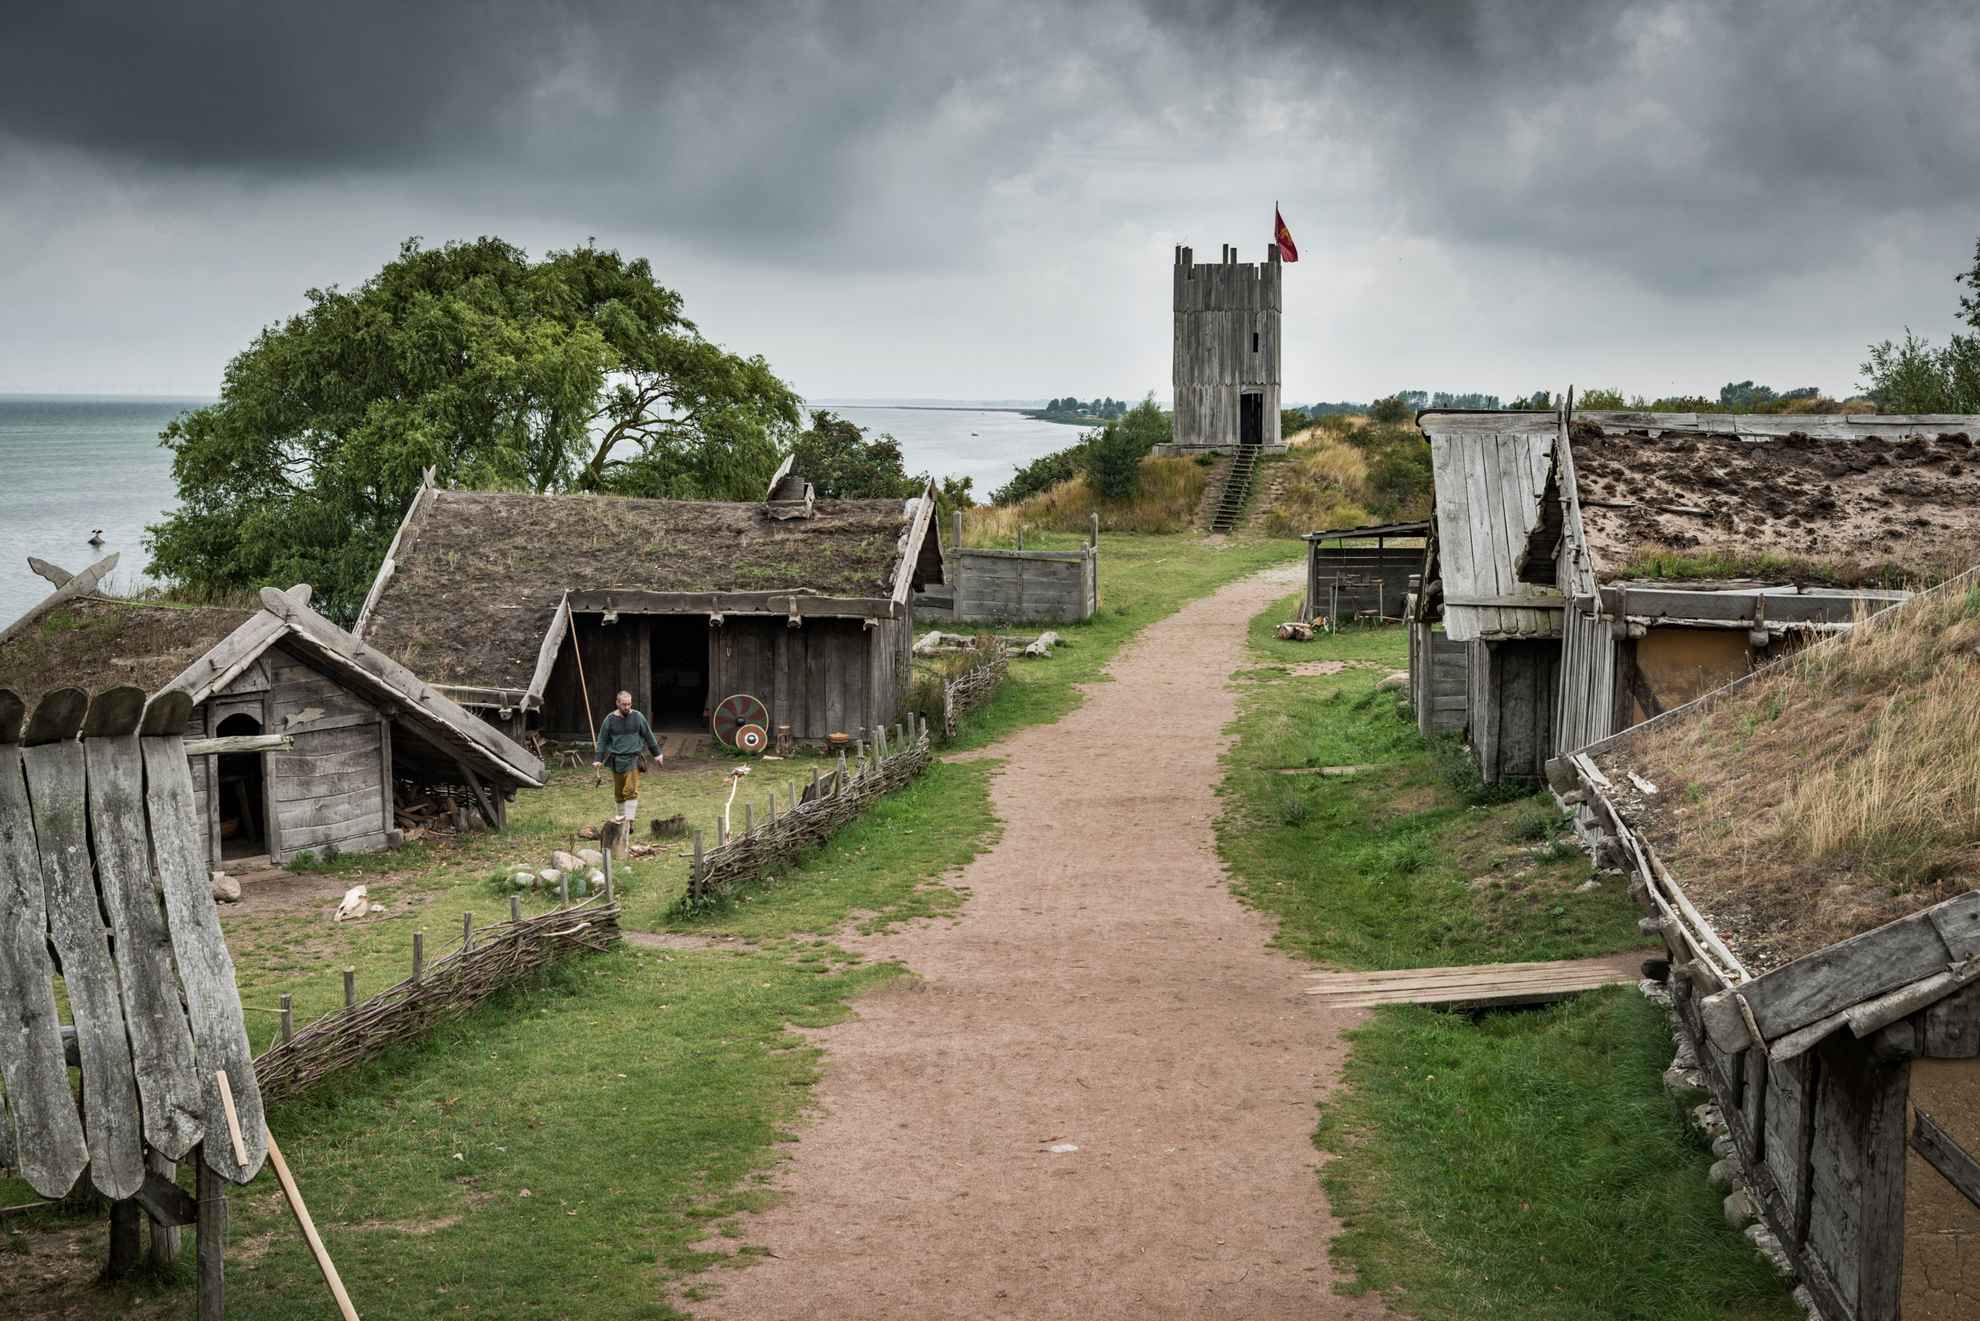 A gravel road leading through a traditional viking village with wooden houses with grass-covered roofs.